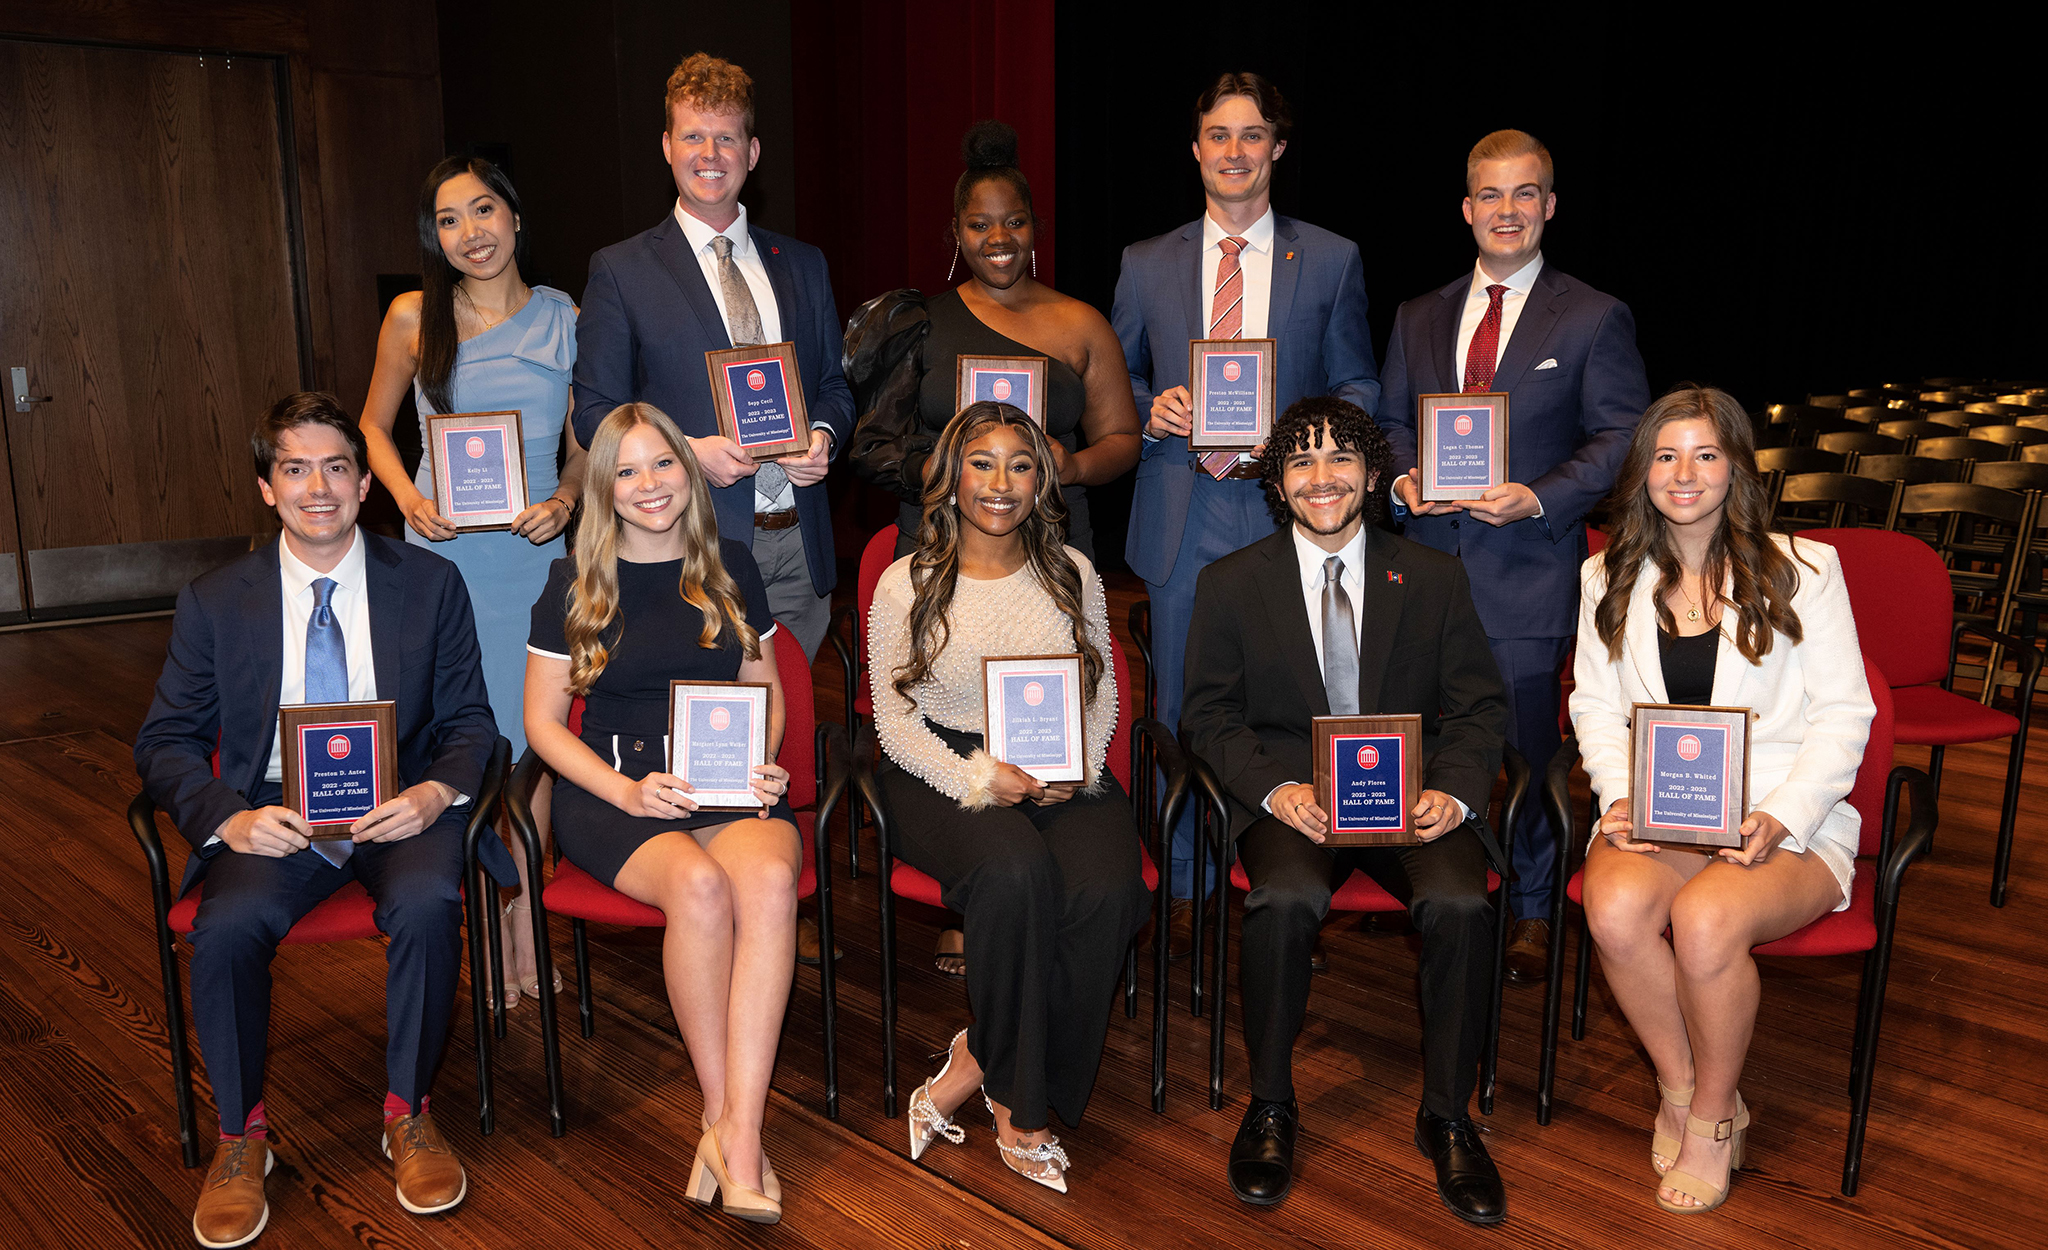 The 2022-23 inductees to the university’s student Hall of Fame celebrate April 14 following a ceremony in their honor at the Gertrude C. Ford Center for Performing Arts. Photo by Thomas Graning/Ole Miss Digital Imaging Services